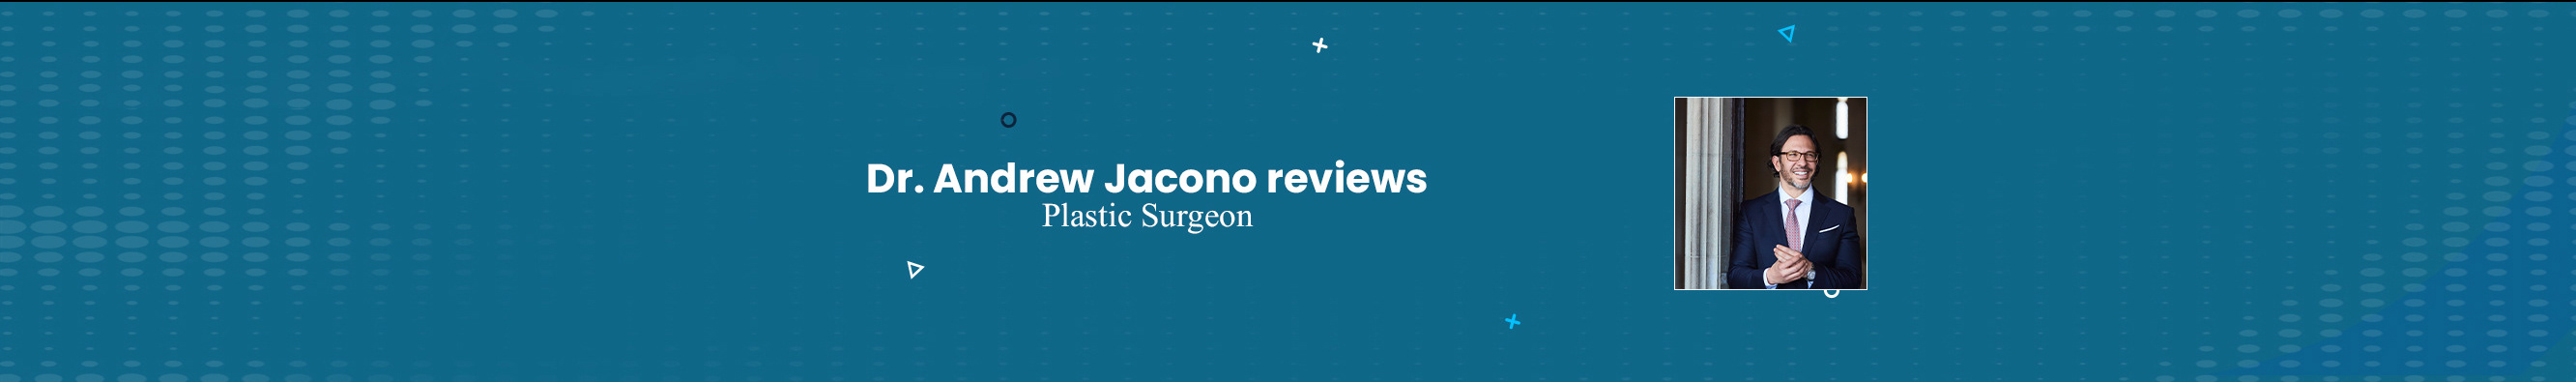 Dr. Andrew Jacono reviews's profile banner